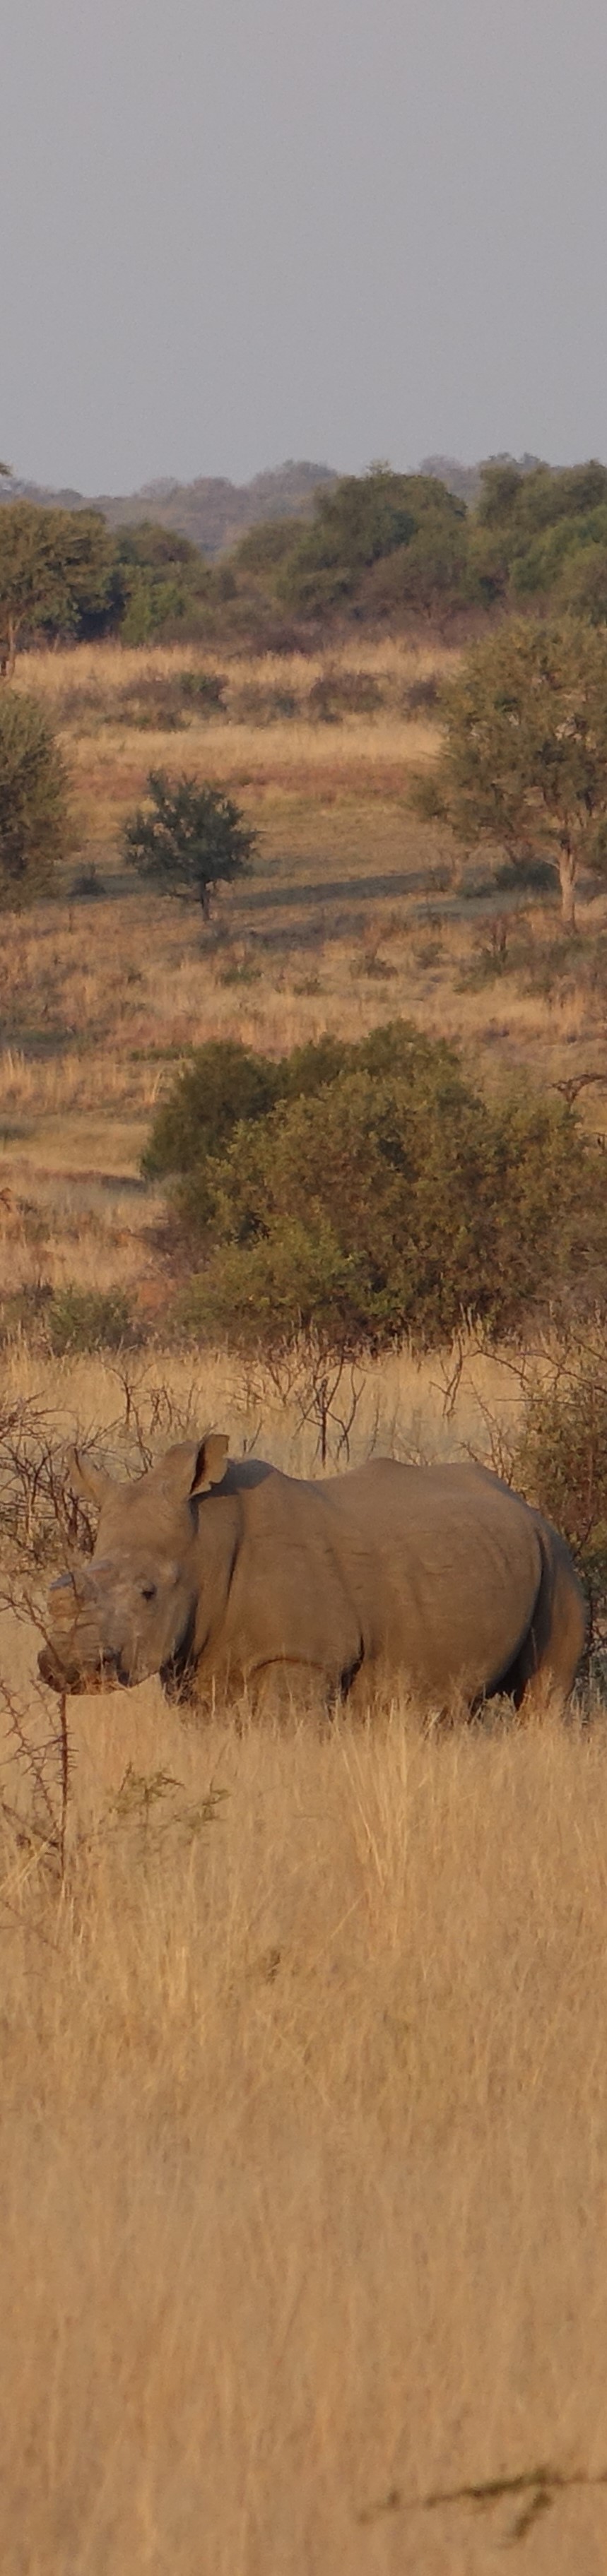 A white rhino standing in the African savanna.